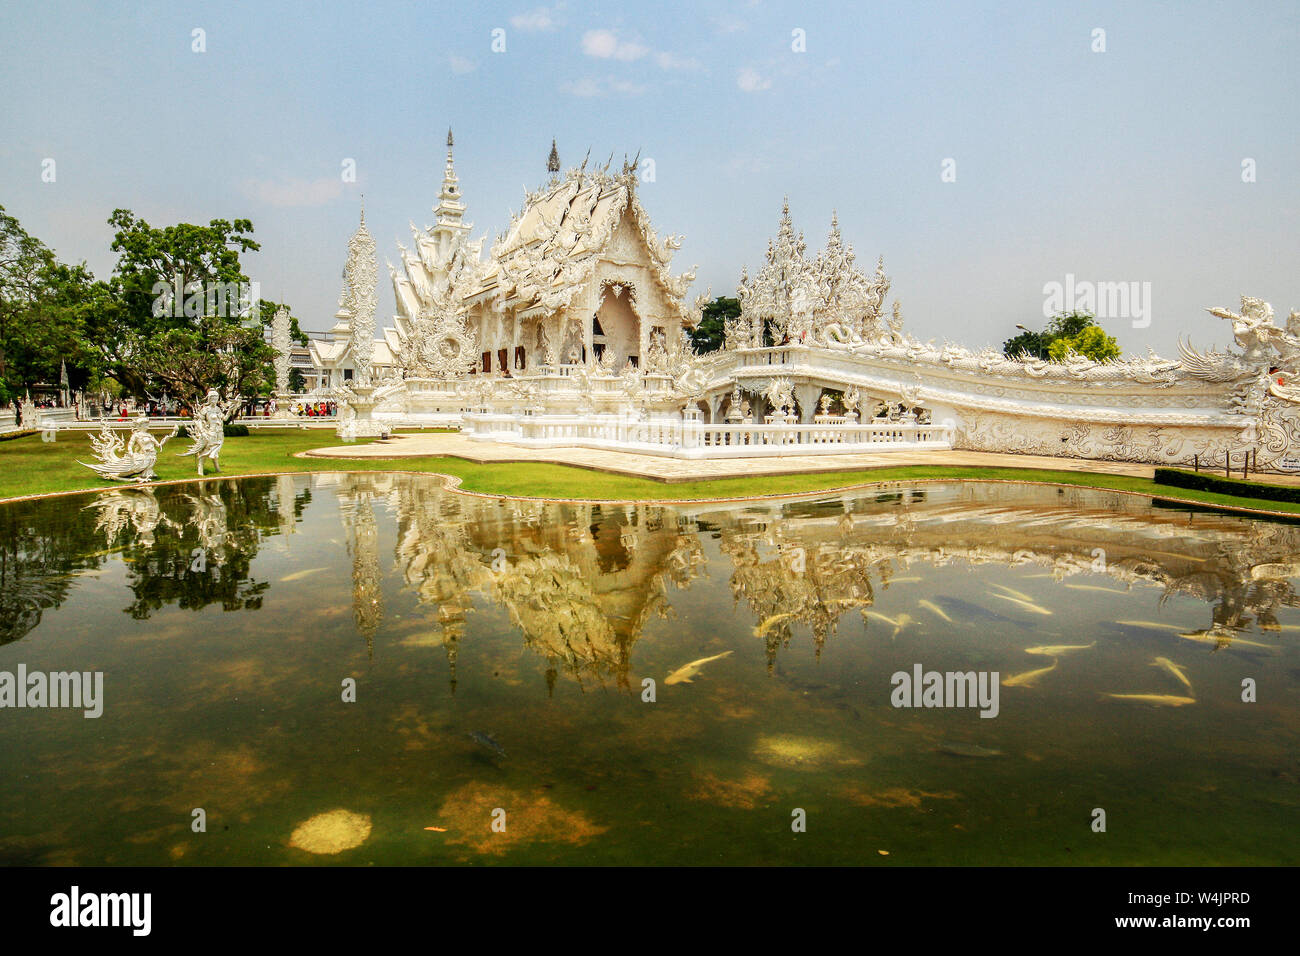 The Bridge symbolizing the Cycle of Rebirth leads to Wat Rong Khun, White Temple, across a Koi pond at Chiang Rai, Thailand. Stock Photo